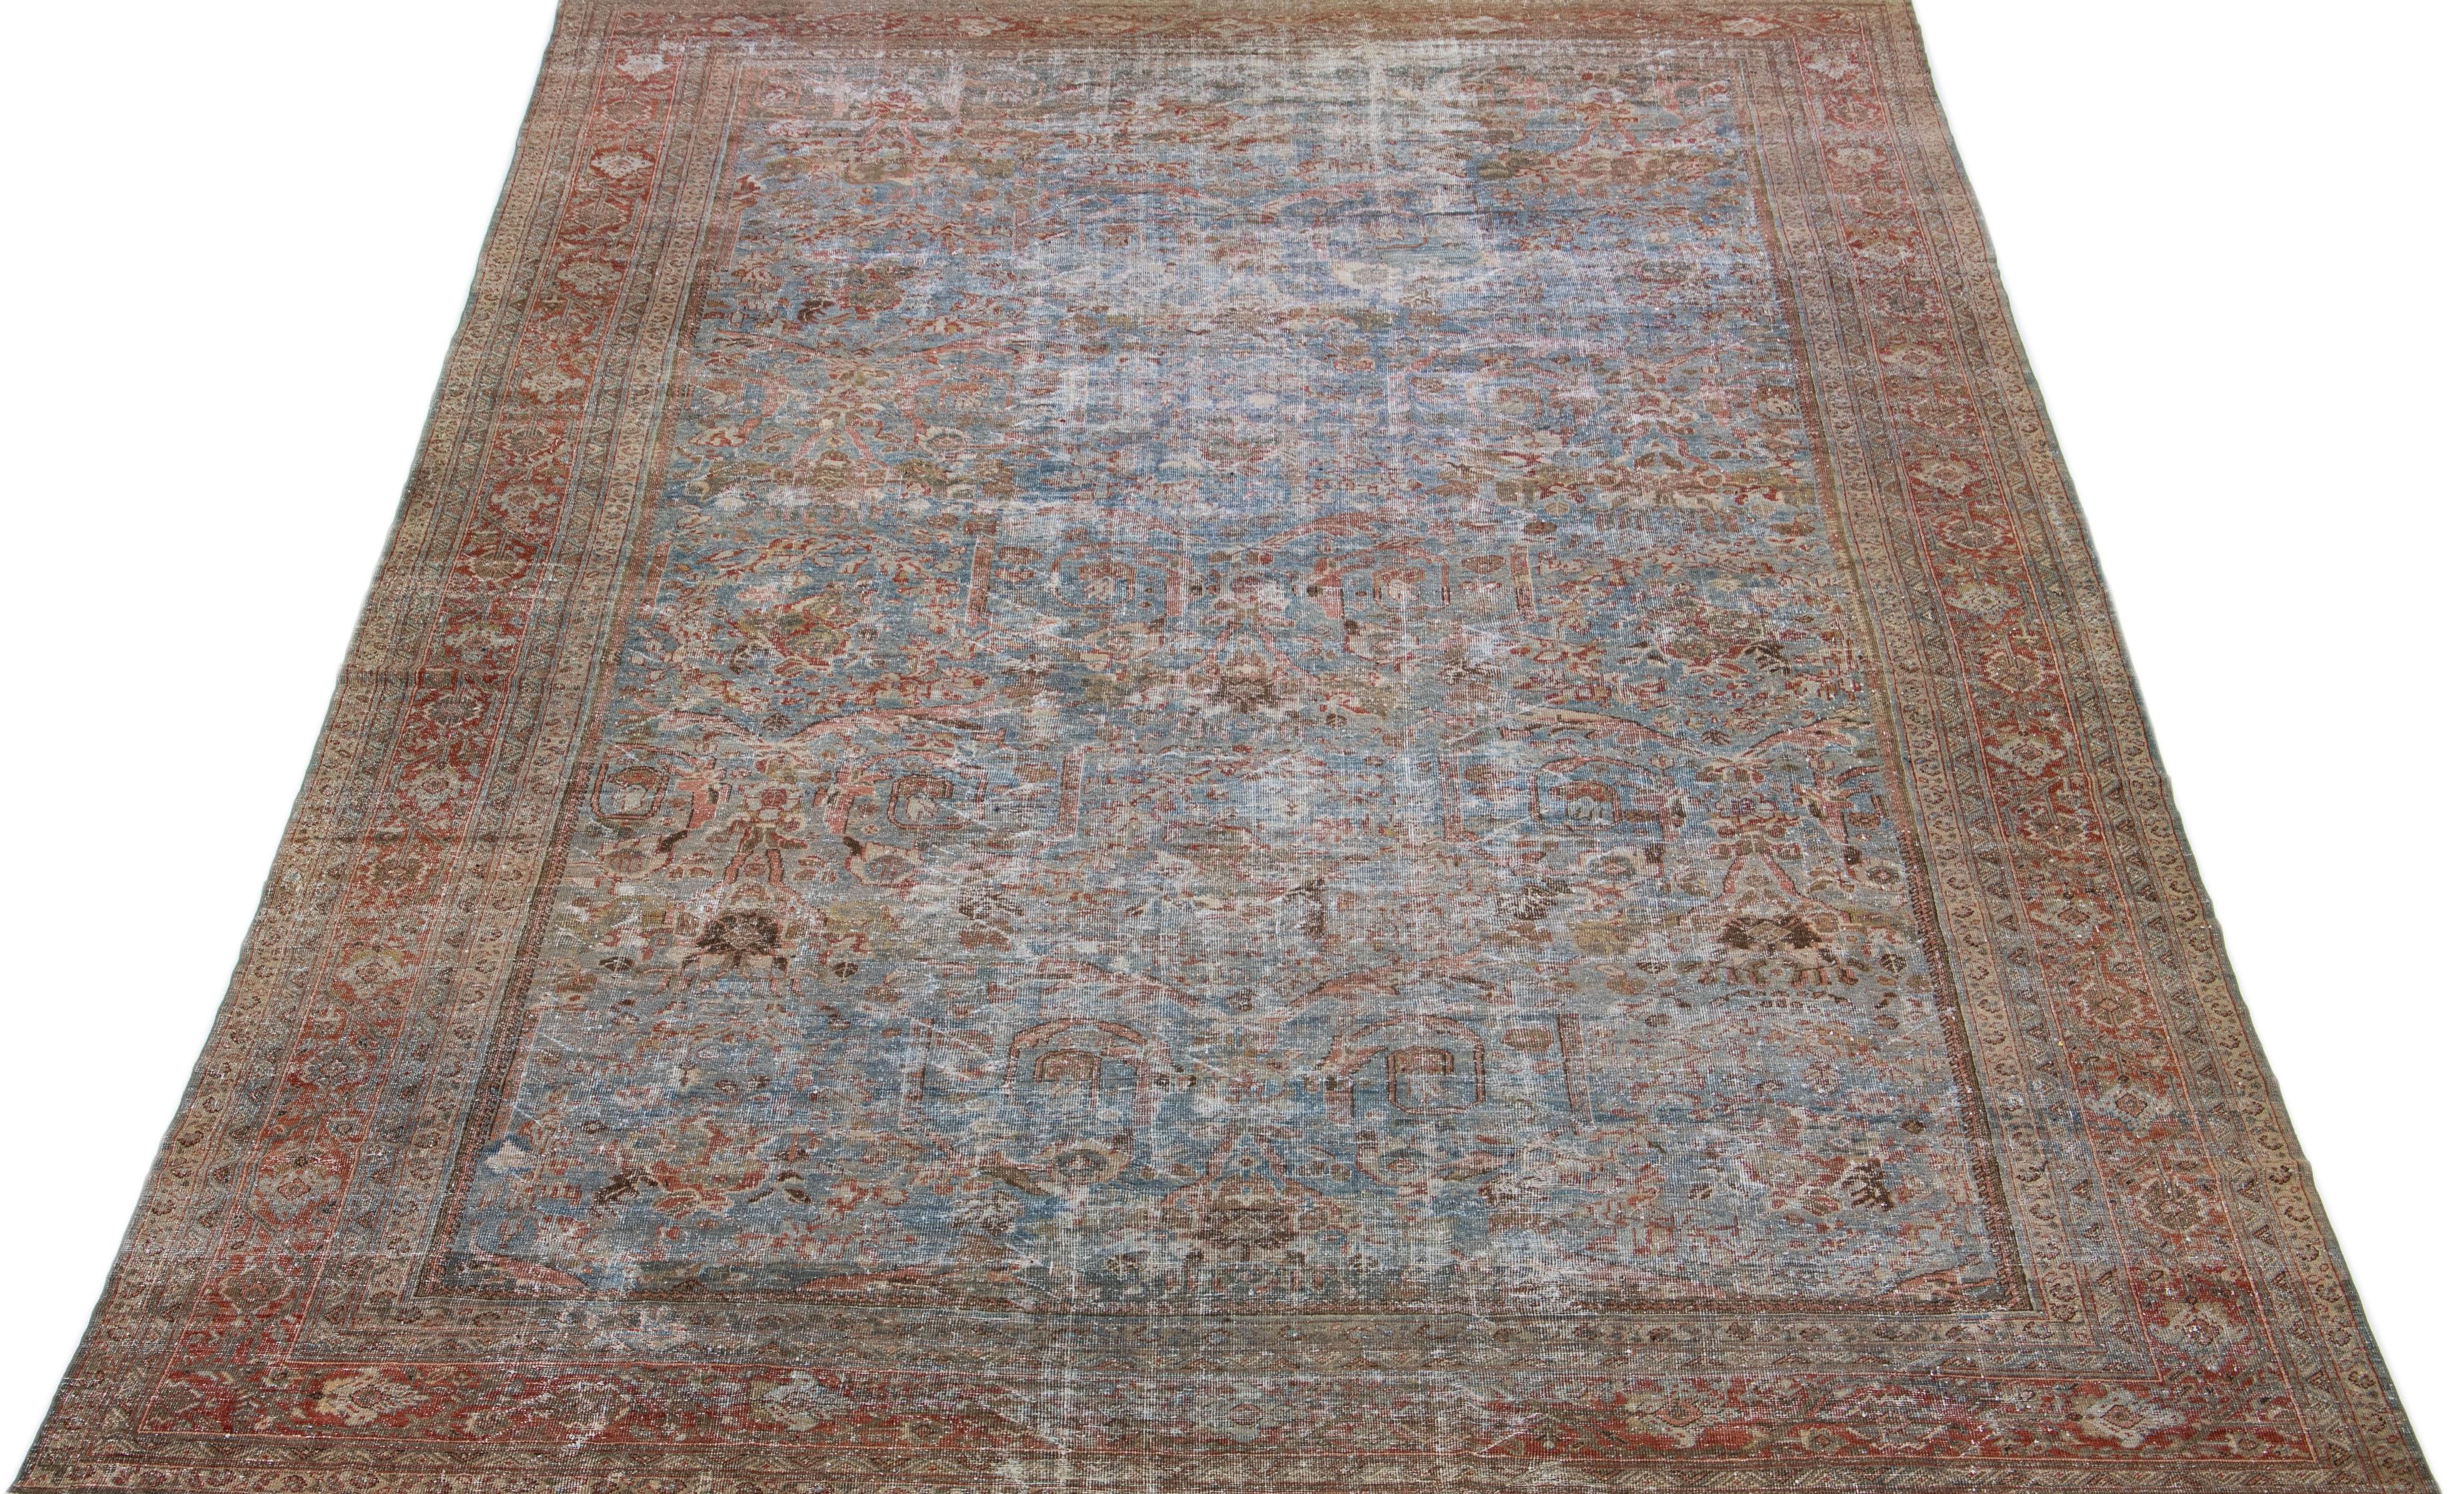 Beautiful hand-knotted antique mahal wool rug with a blue color field. This Persian rug has rust and brown accent colors in an all-over floral design. 

This rug measures: 11'10